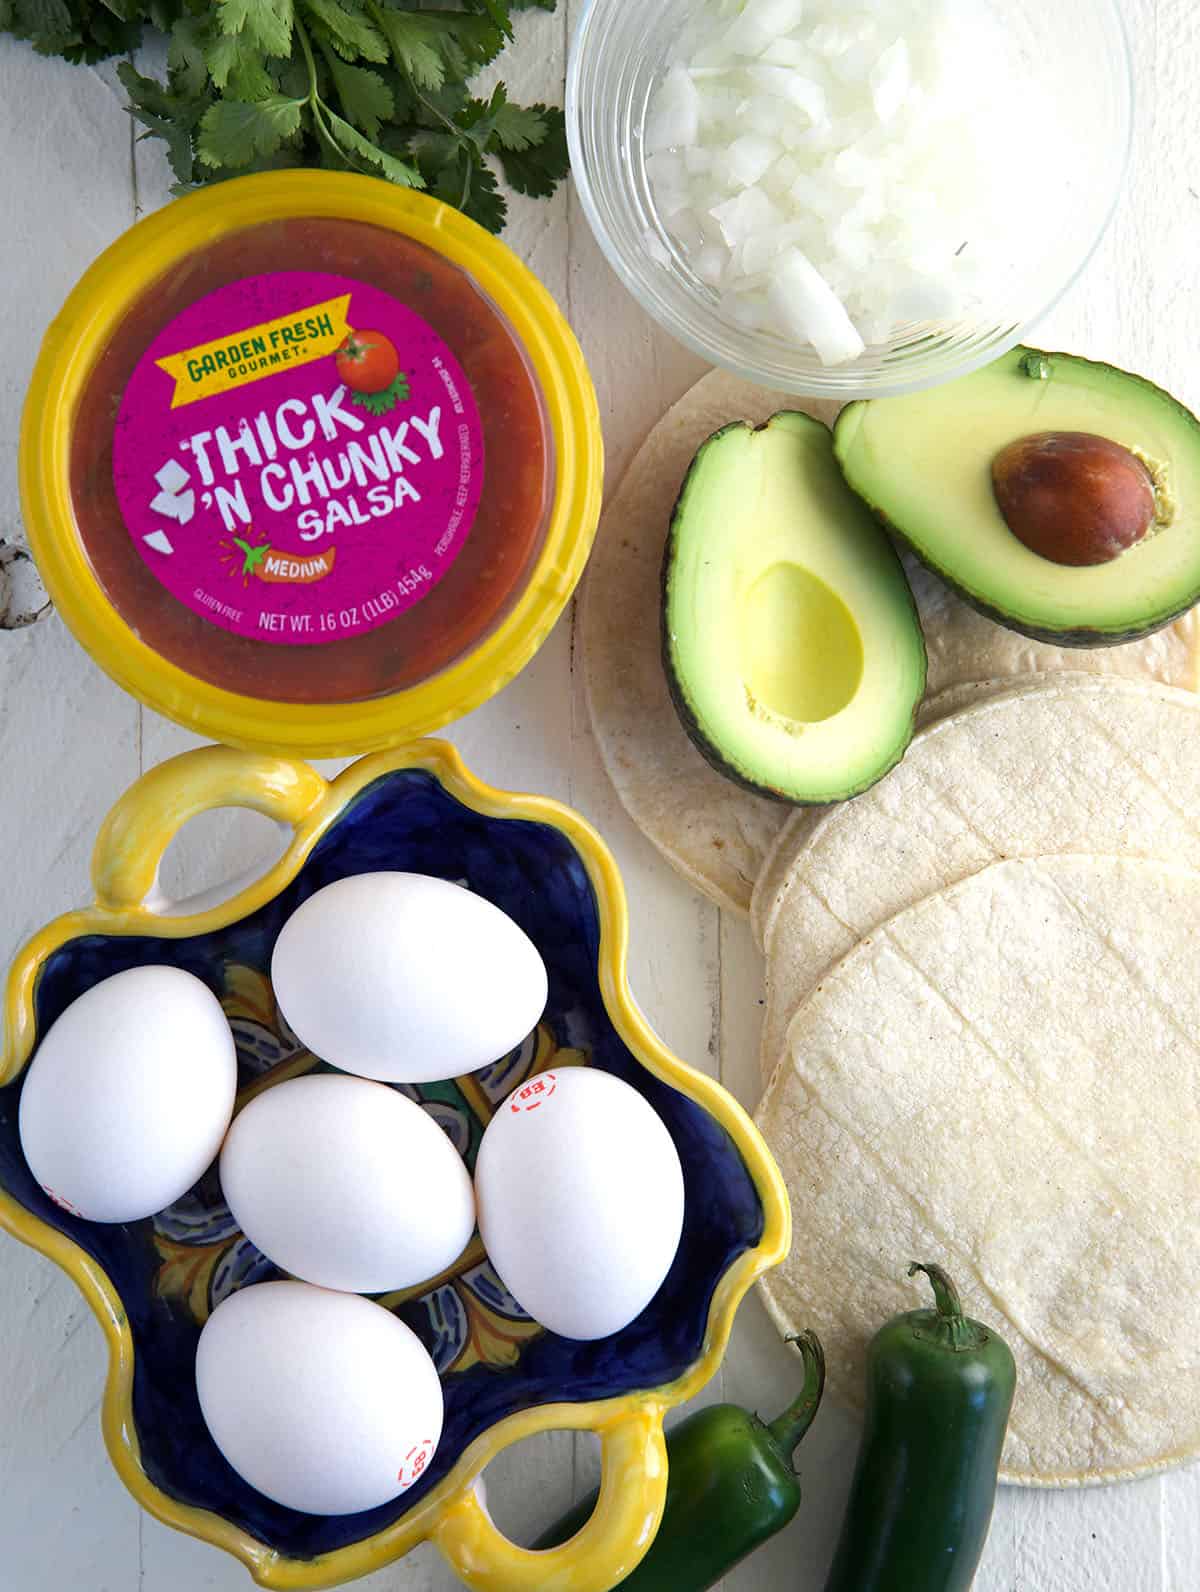 The ingredients for breakfast tacos are placed on a white surface.